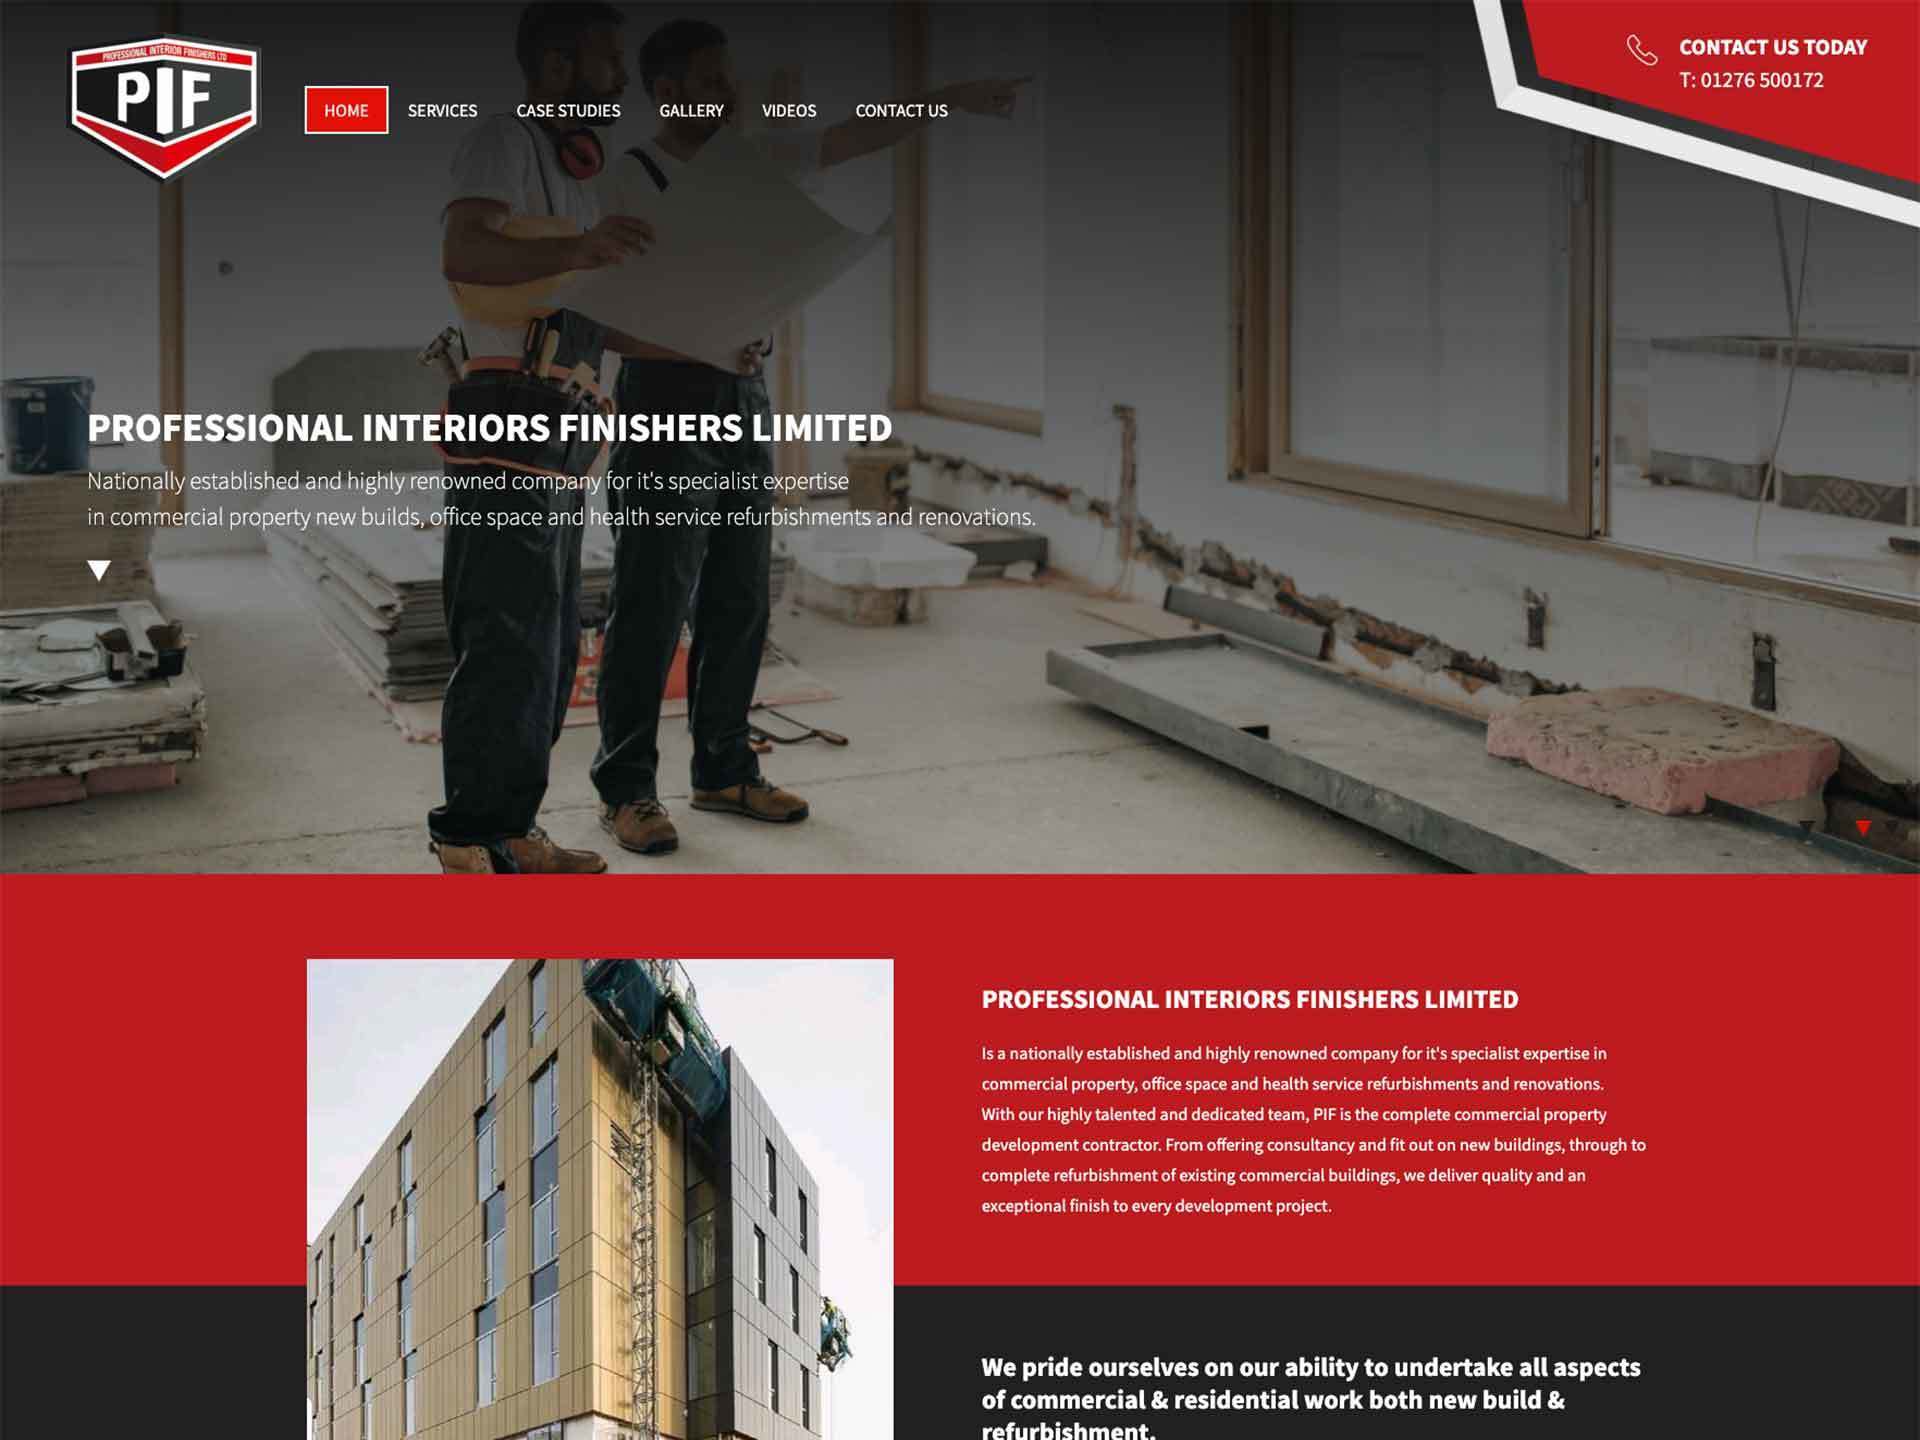 Professional Interiors Finishers Limited website